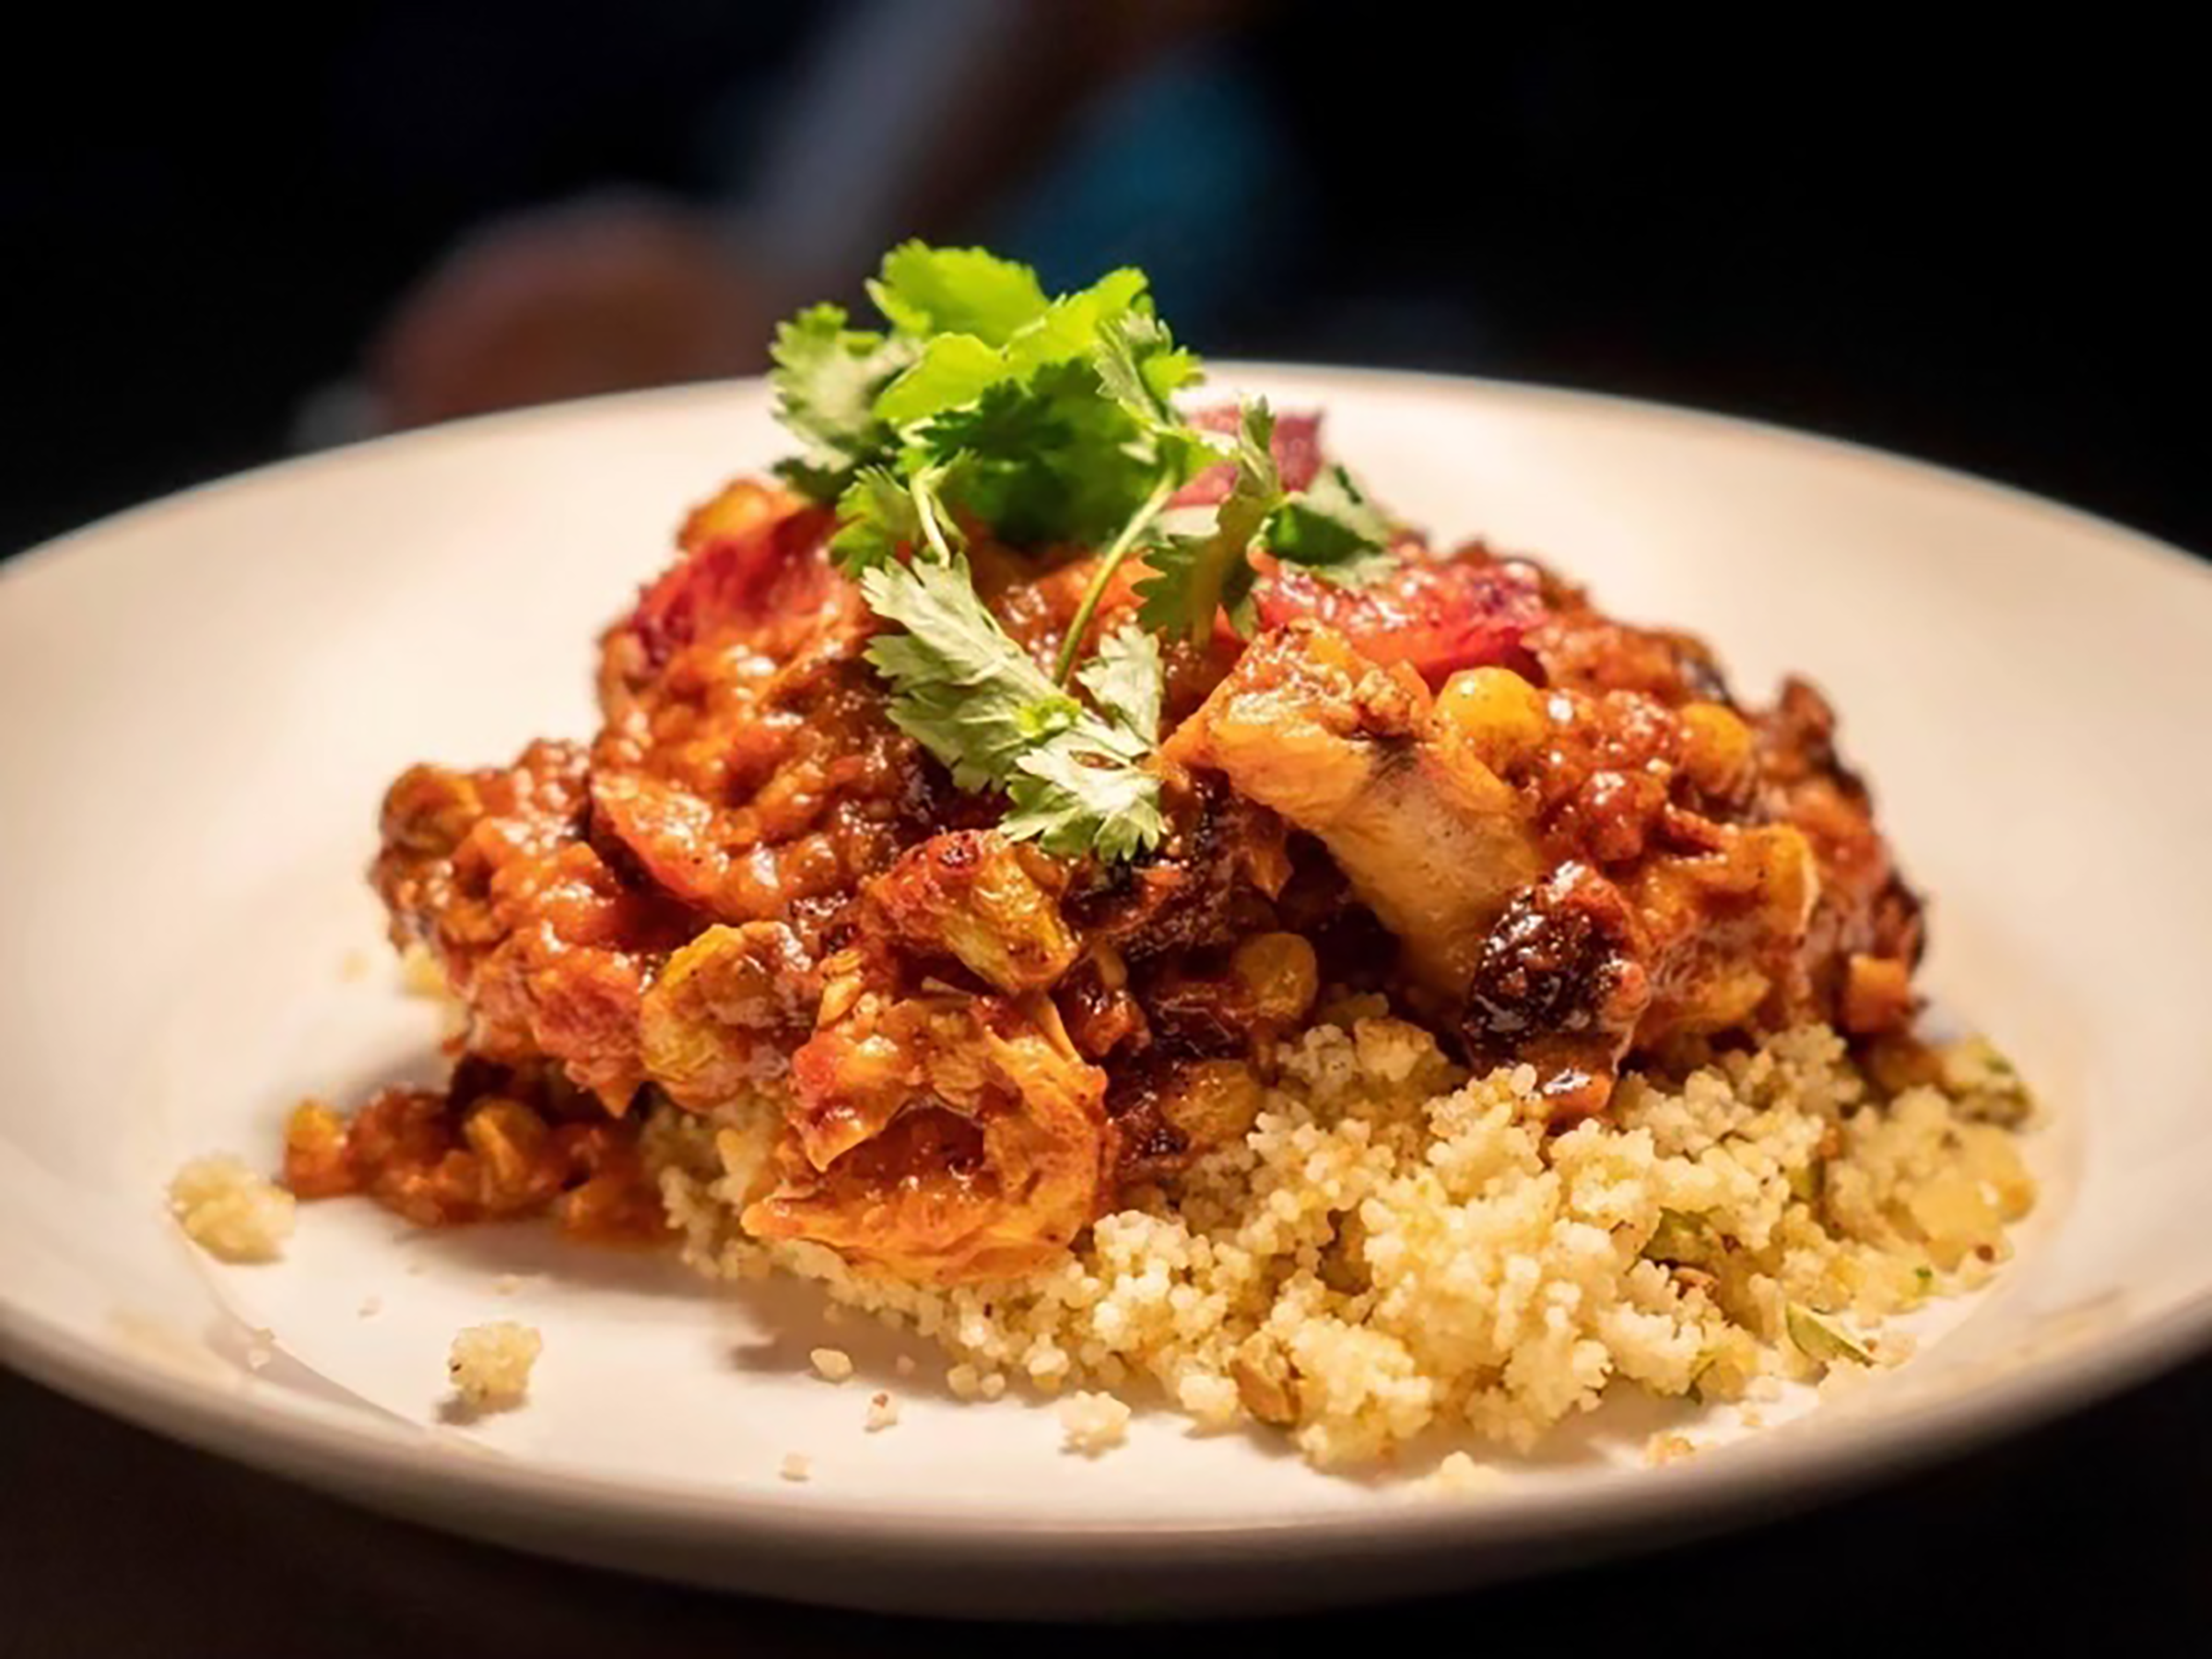 A plate of Moroccan chicken on a bed of pistachio couscous at Nova in Dallas.